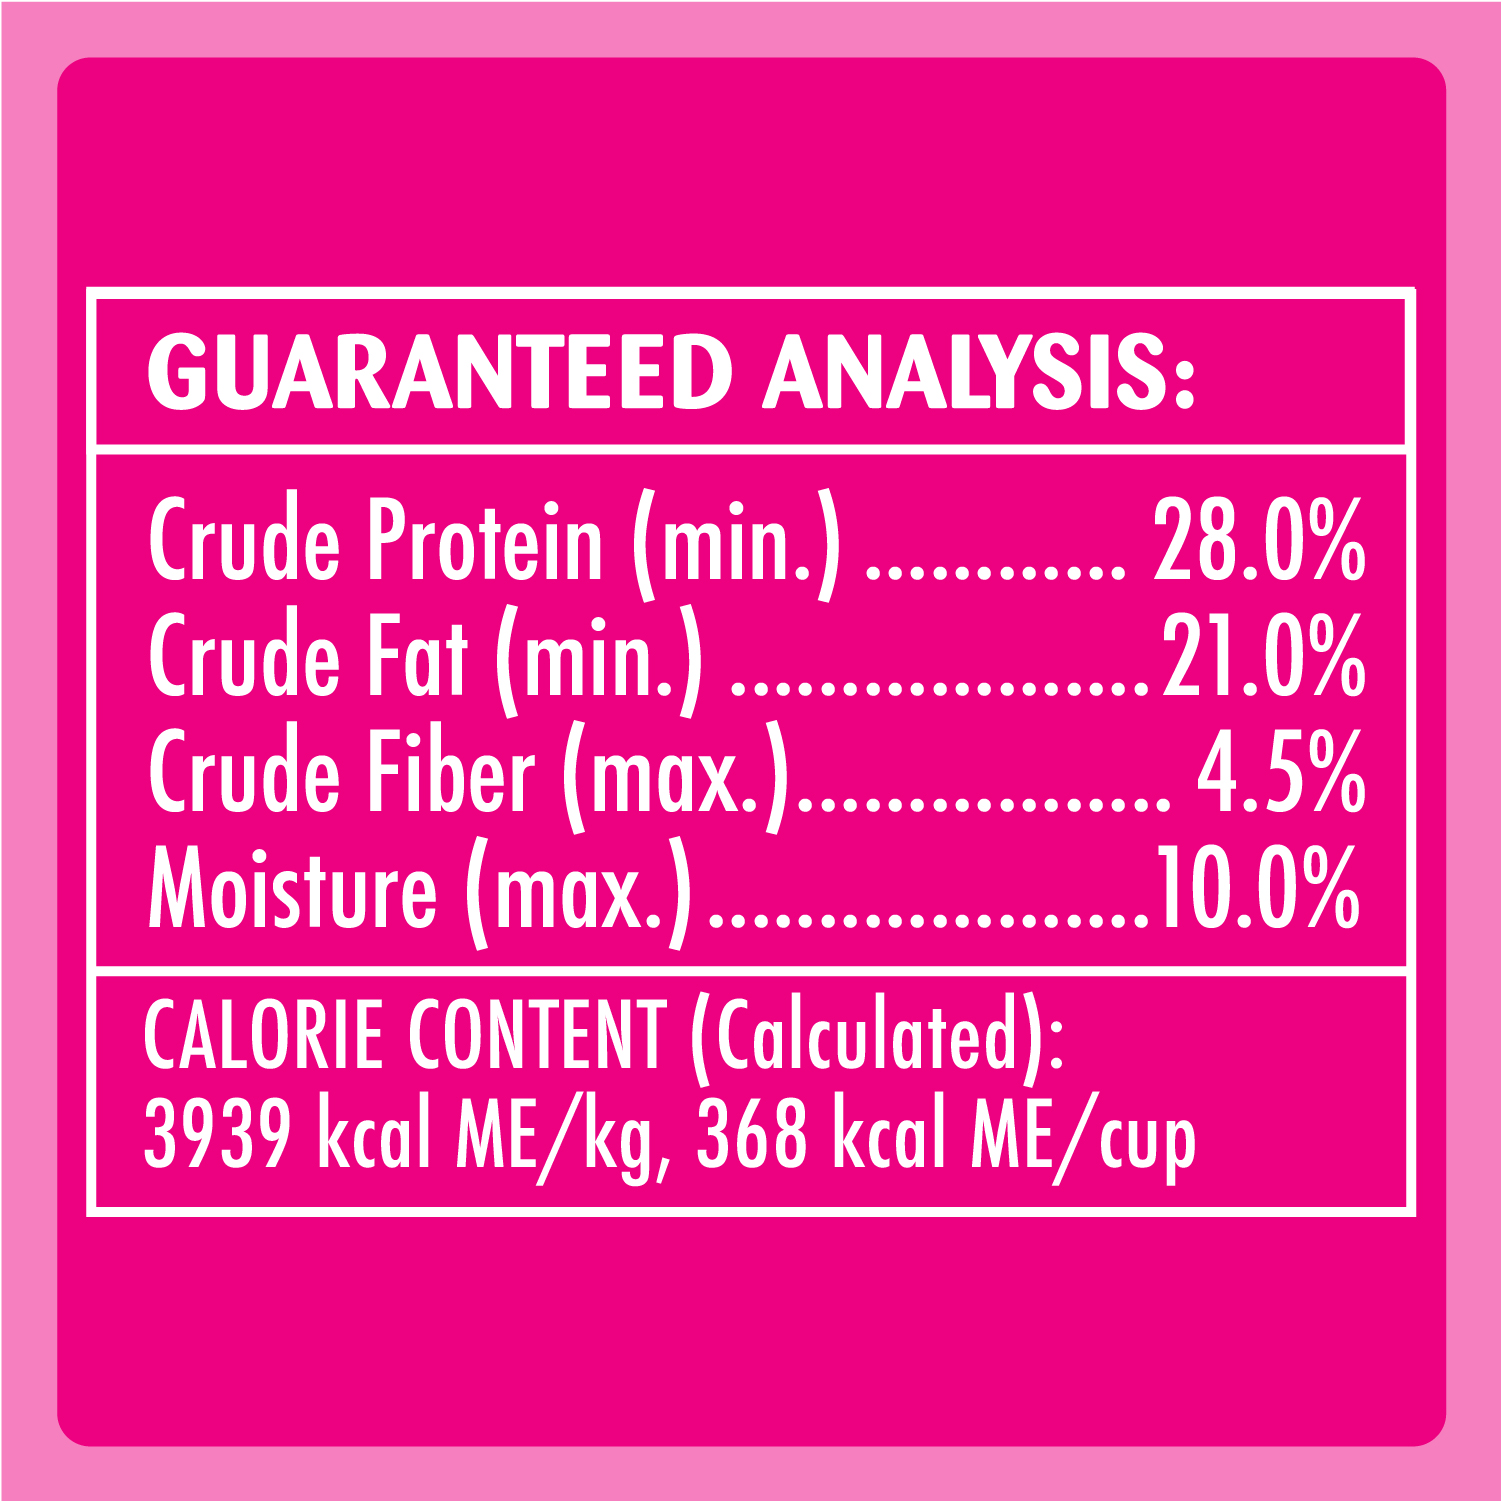 TEMPTATIONS™ Cat Treats, Hearty Beef Flavour, 180g guaranteed analysis image